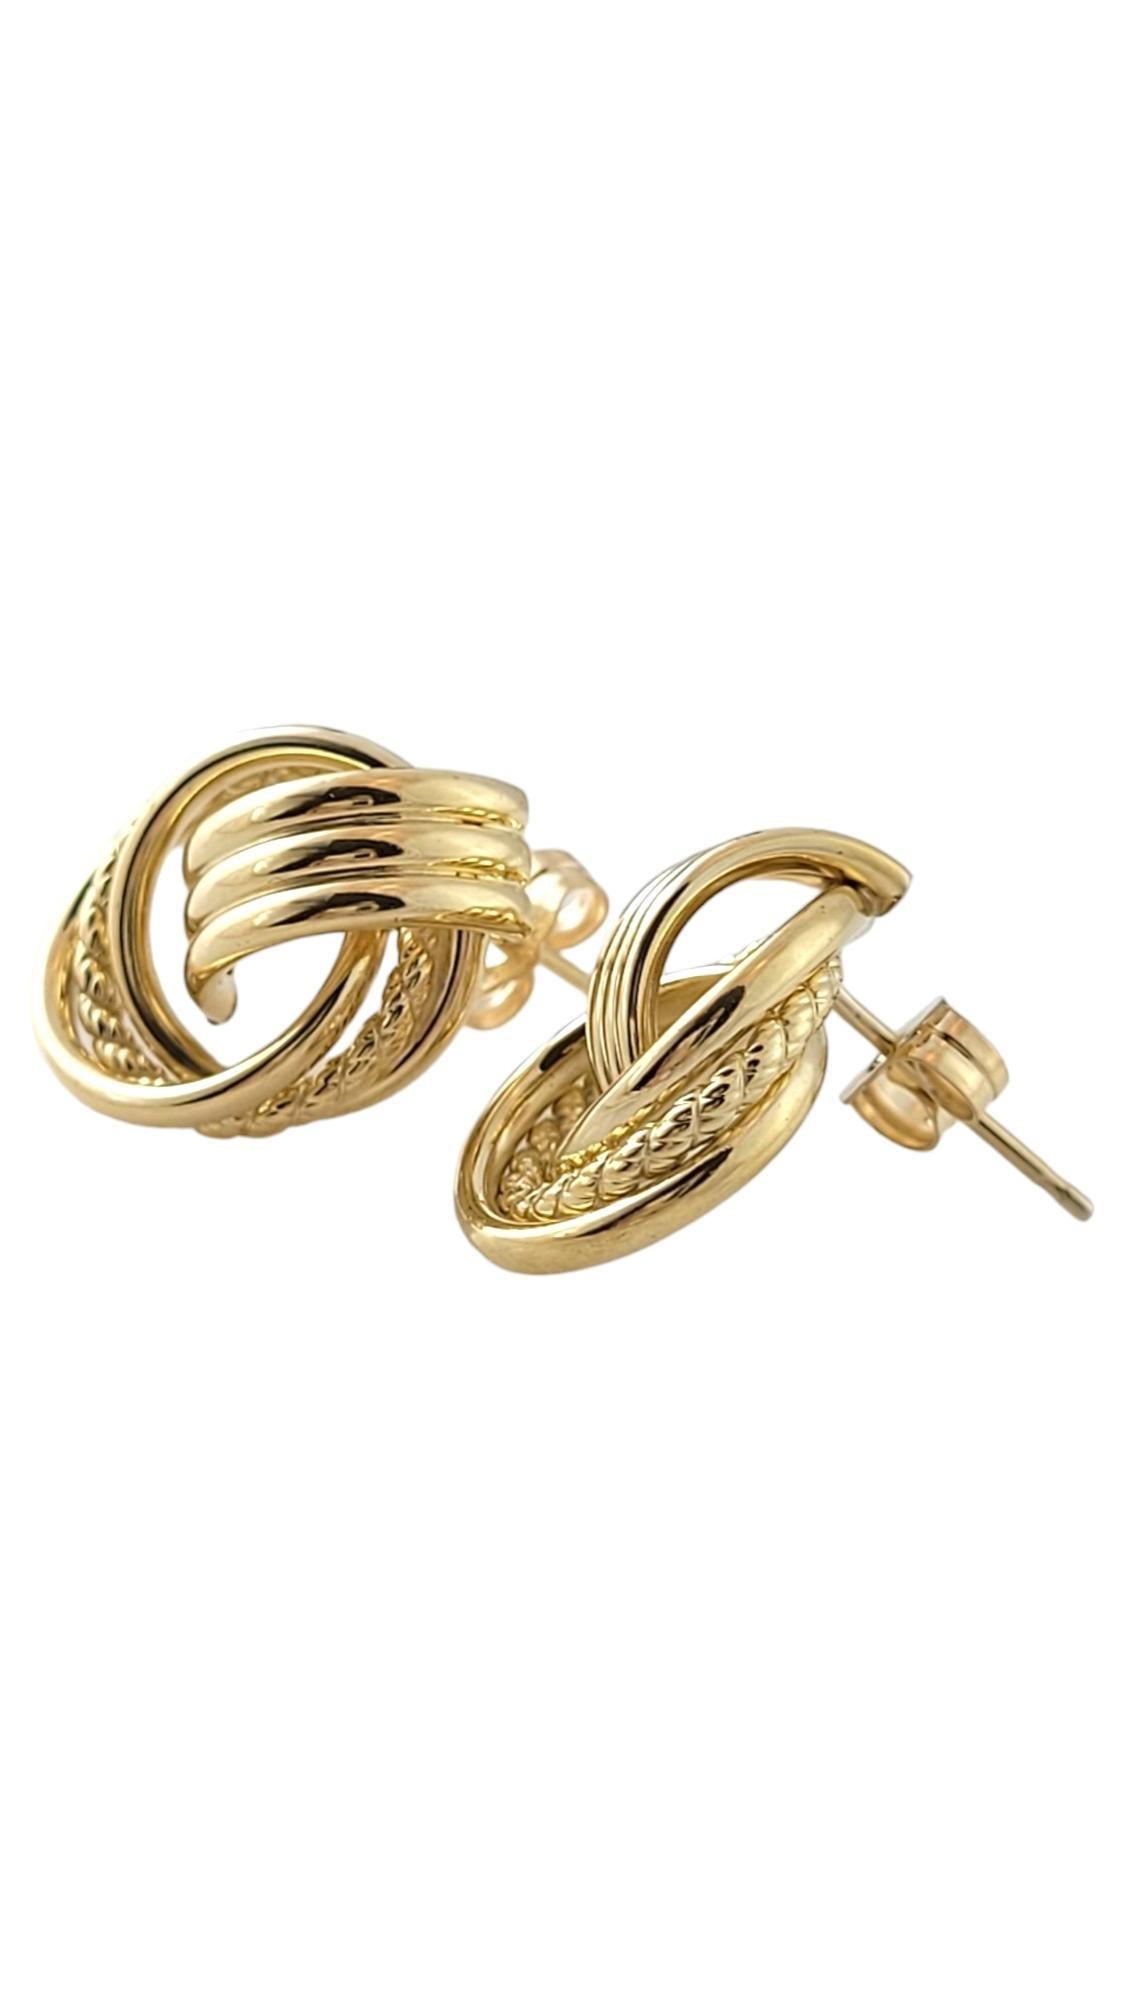 14K Yellow Gold Knot Earrings

This beautiful knot stud earrings crafted from 14K yellow gold have a unique, gorgeous pattern!

Size: 17.0mm X 12.5mm X 7.0mm

Weight: 1.8 dwt/ 2.8 g

Hallmark: 14K

Very good condition, professionally polished.

Will